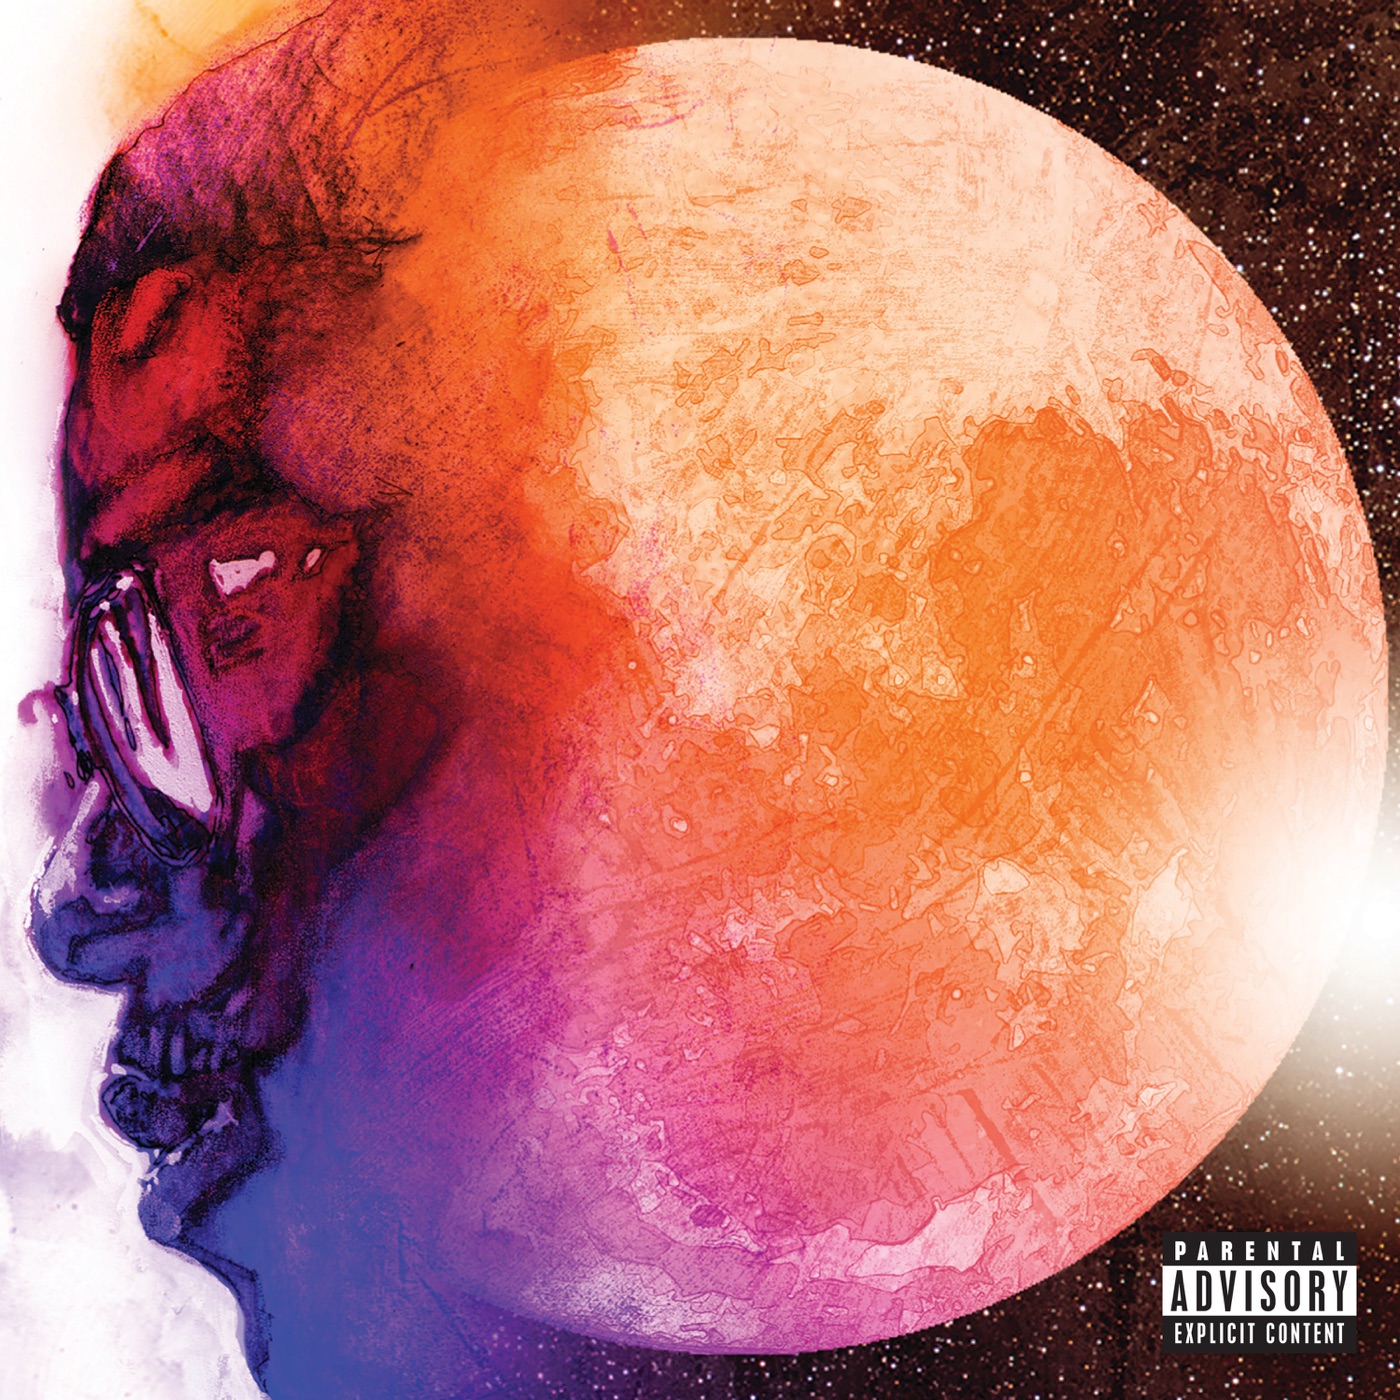 Man On The Moon: The End Of Day by Kid Cudi